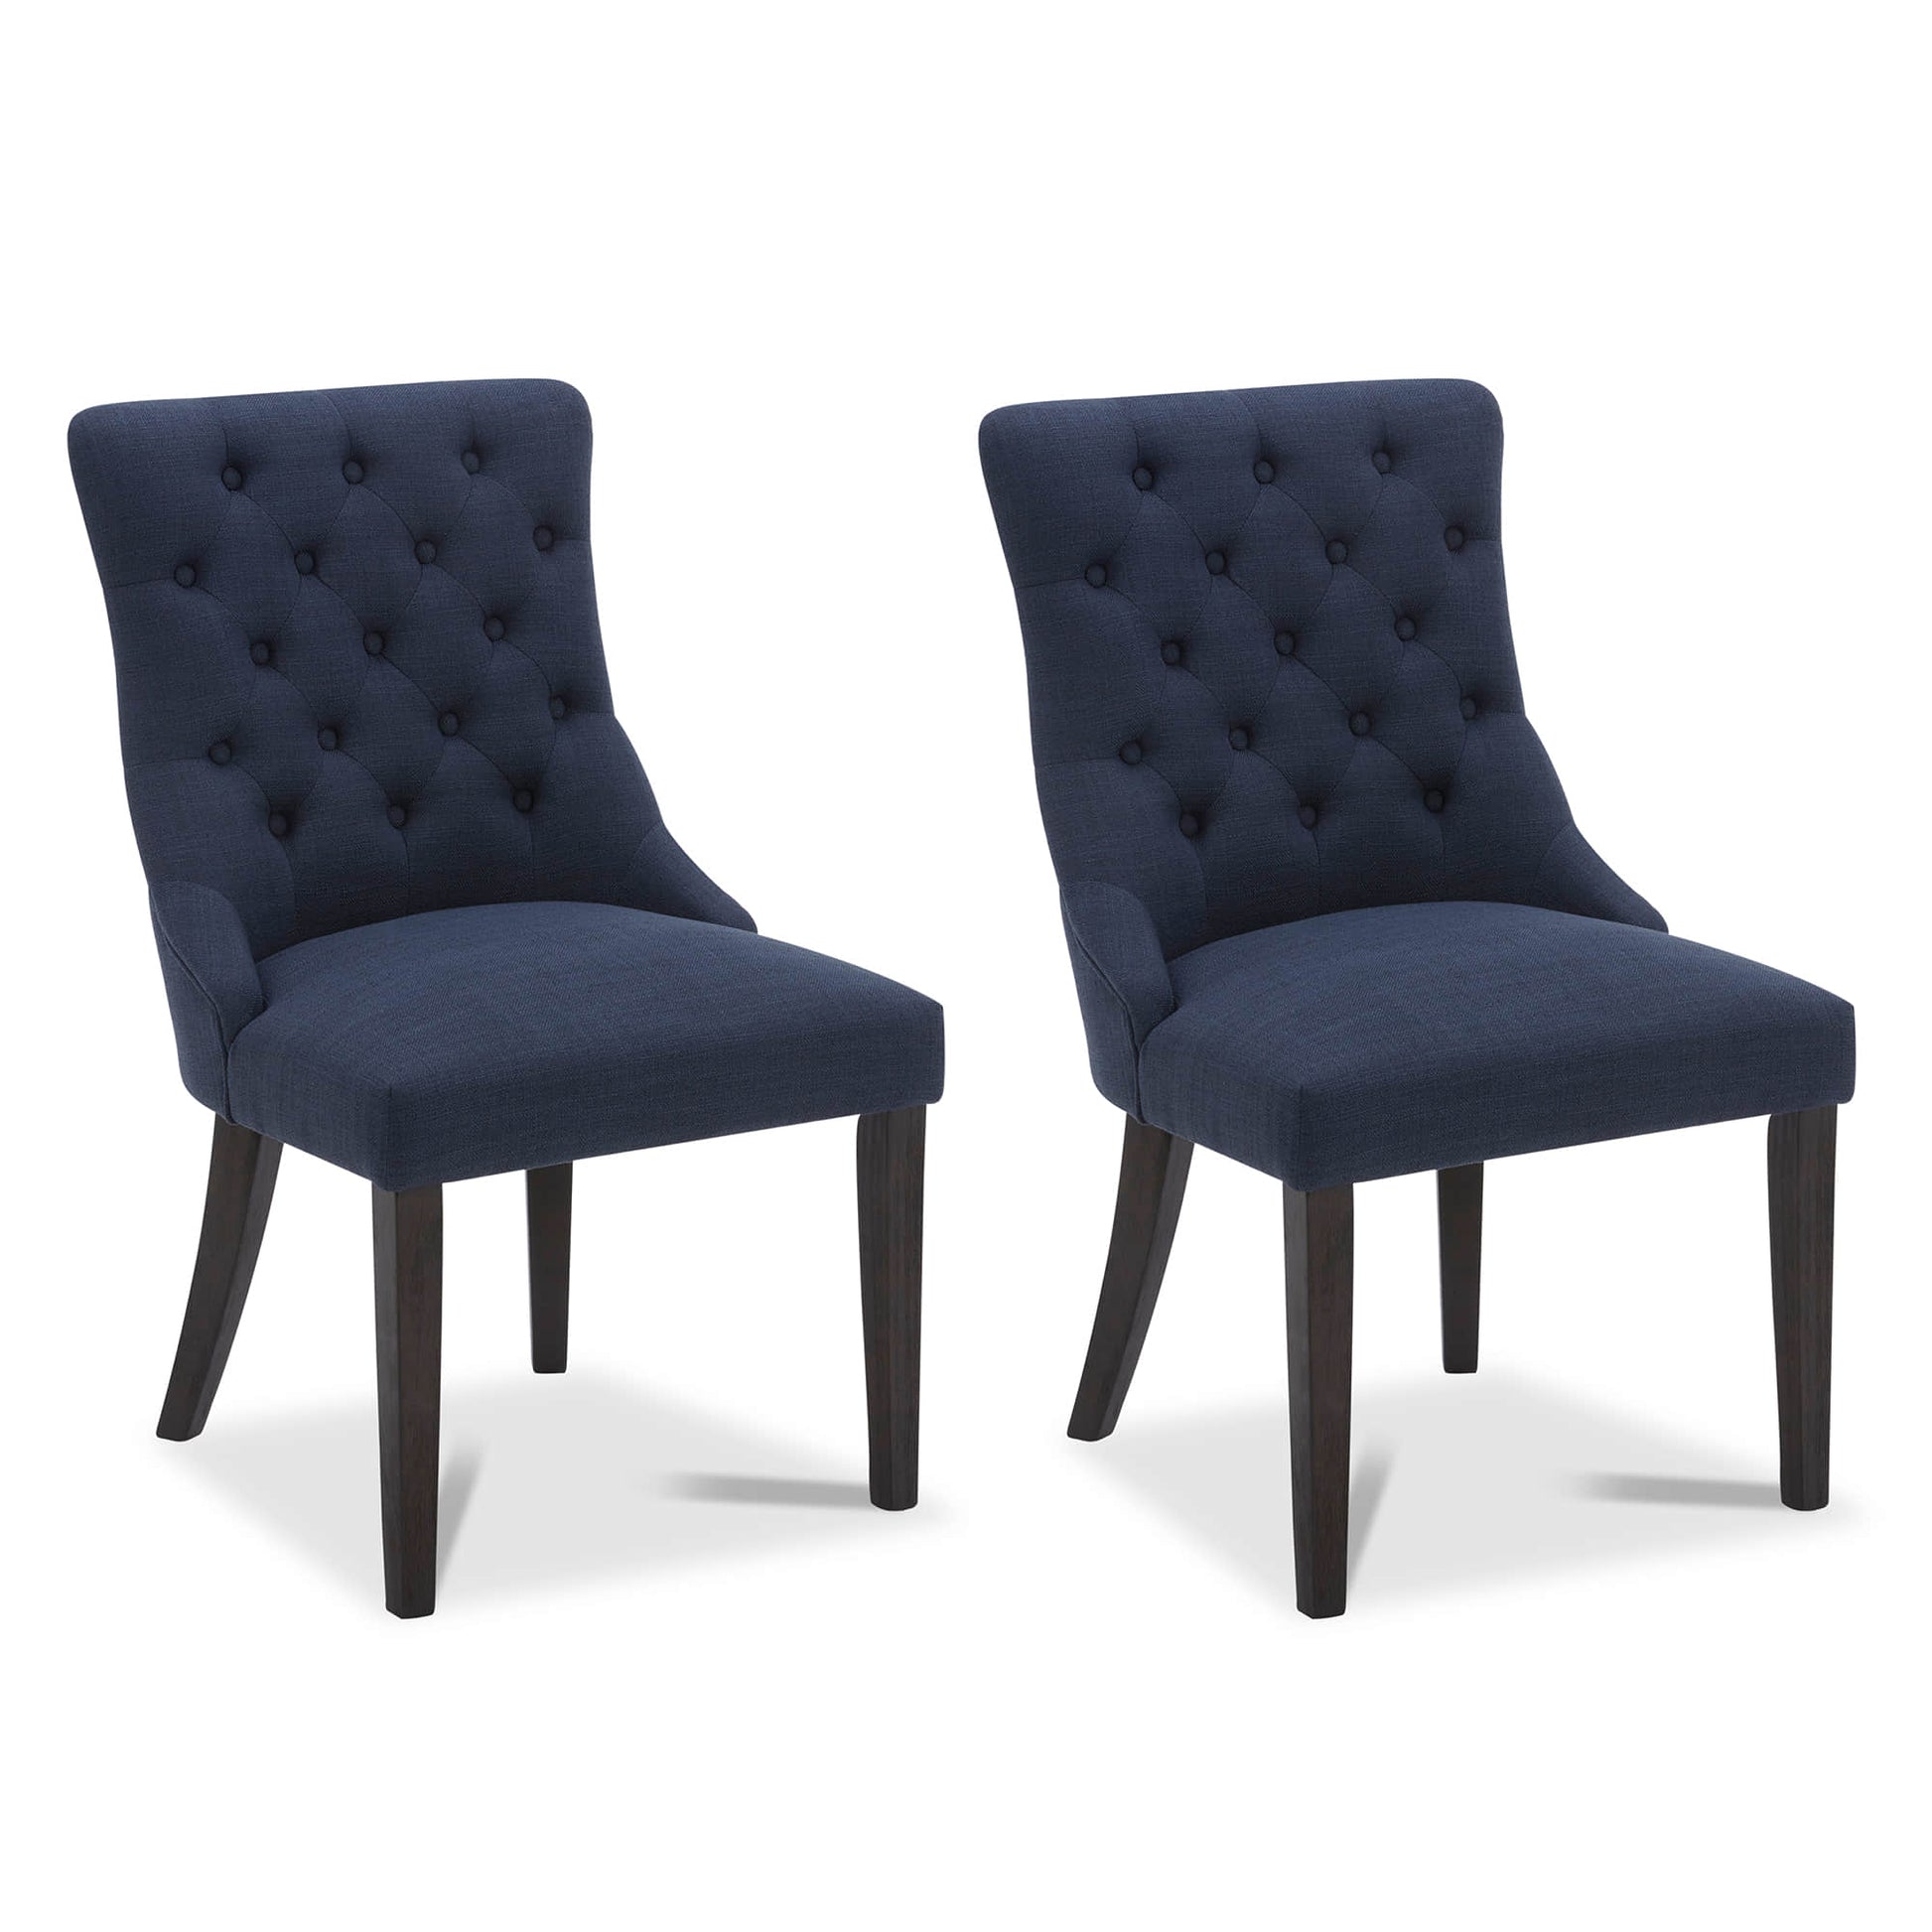 CHITA LIVING-Morgan Prime Tufted Dining Chair (Set of 2)-Dining Chairs-Performance Fabric-Insignia Blue-